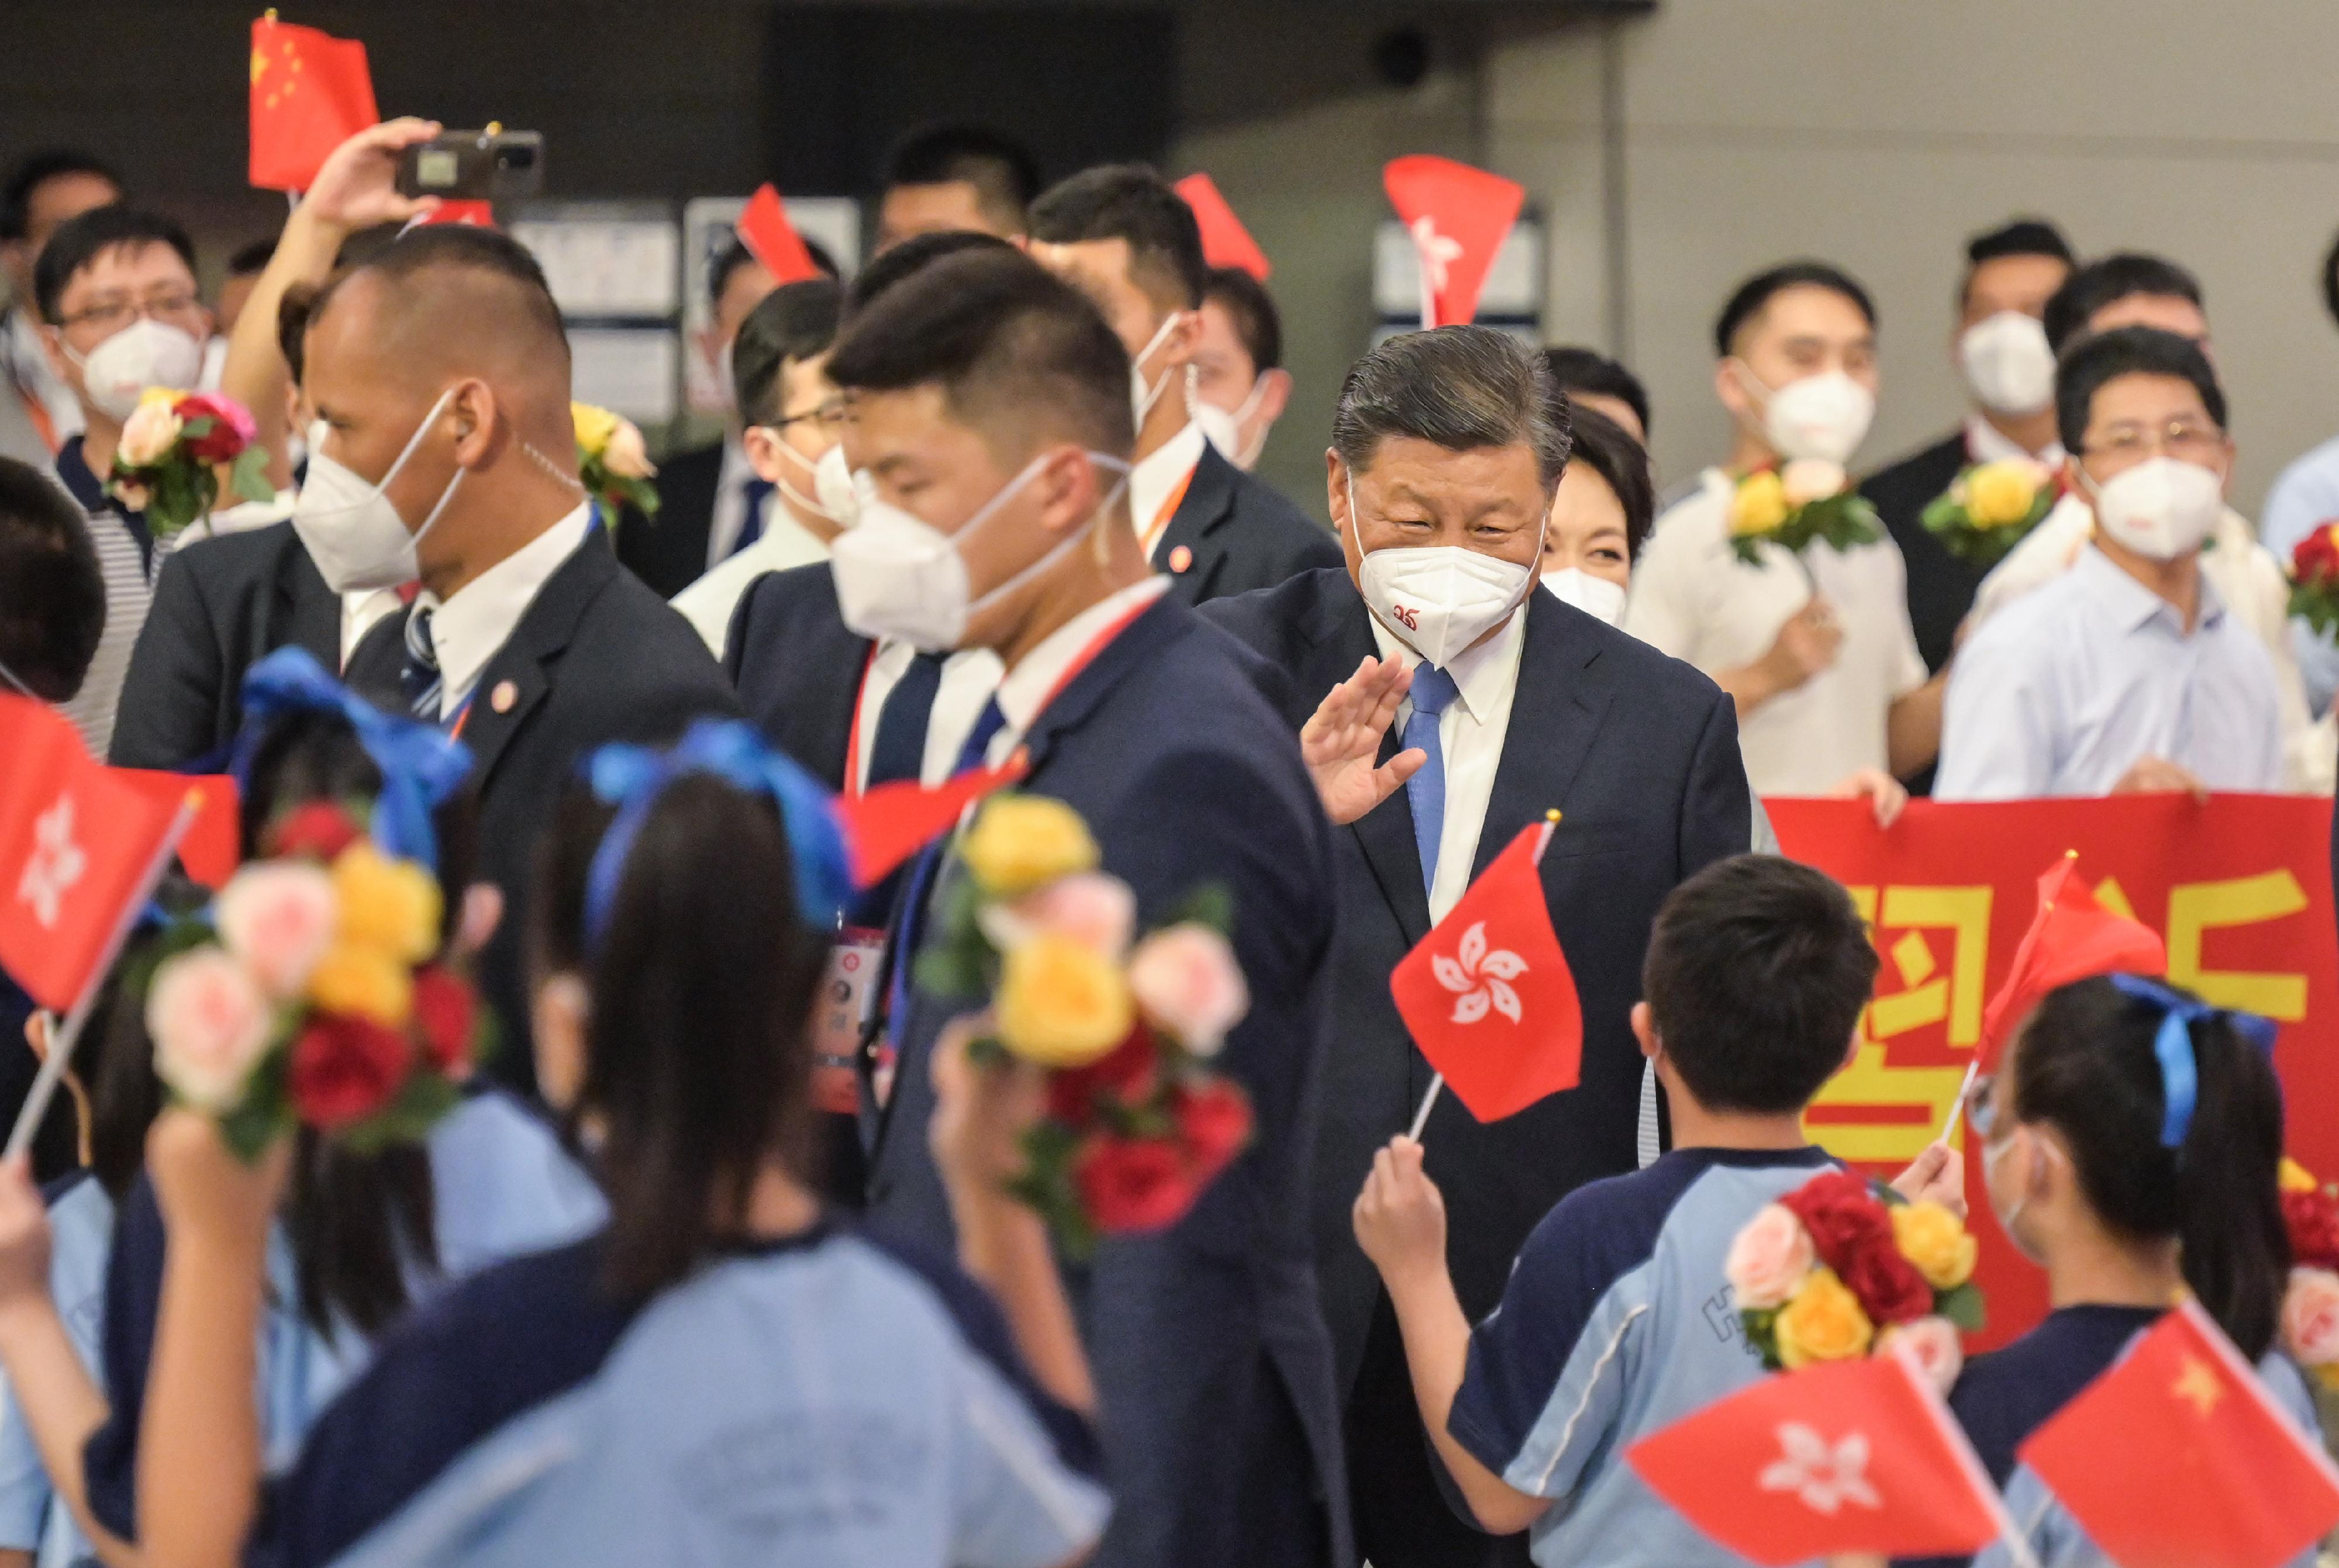 President Xi Jinping waves to the students and people welcoming his arrival at the West Kowloon Station of the Guangzhou-Shenzhen-Hong Kong Express Rail Link today (June 30).